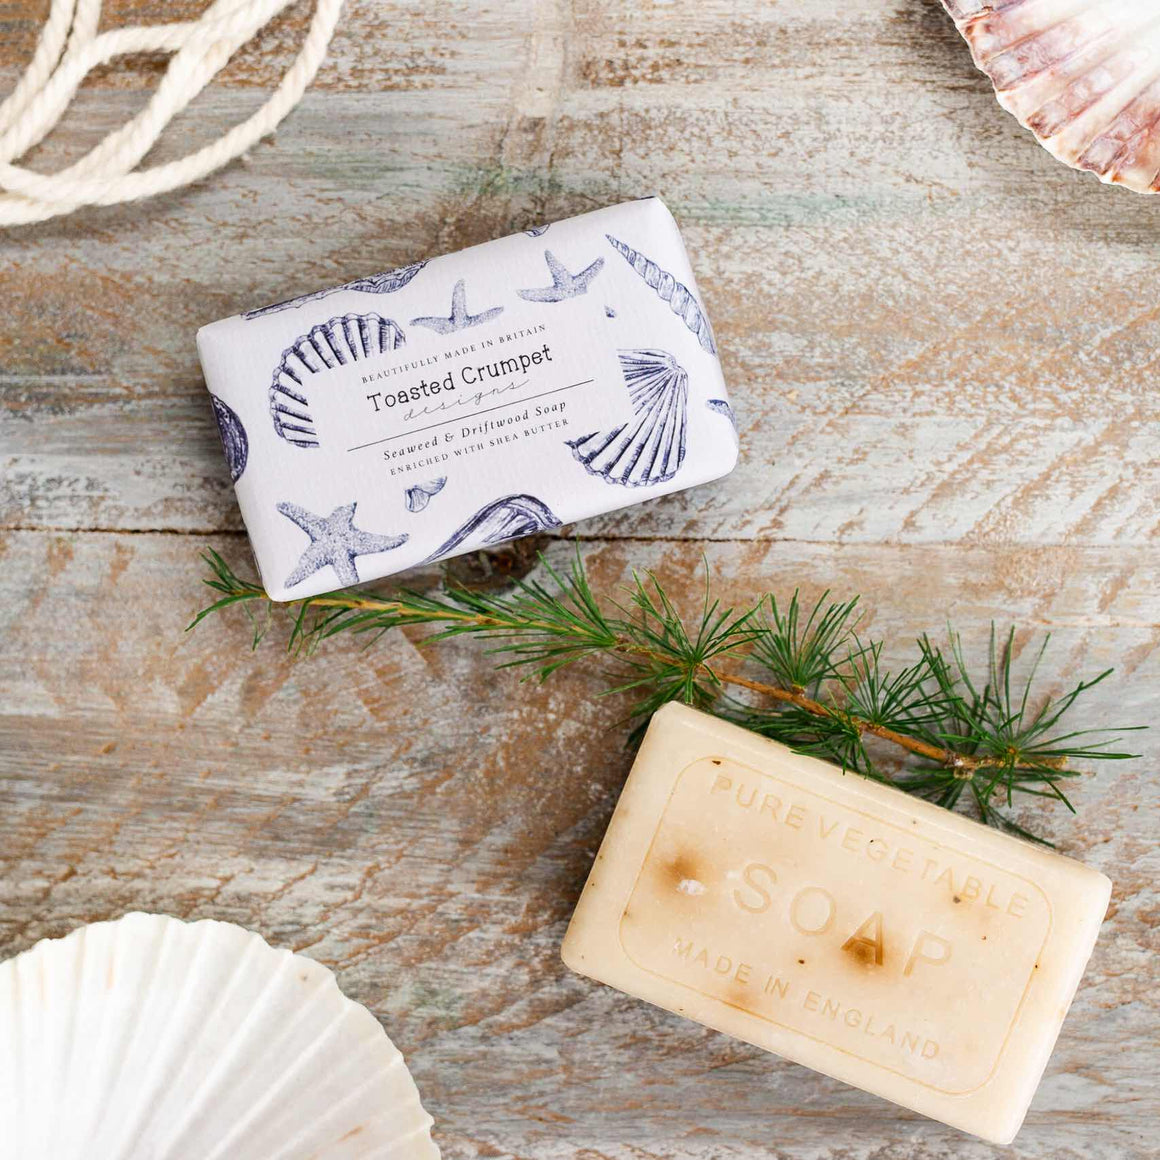 Toasted Crumpet Seaweed & Driftwood Soap